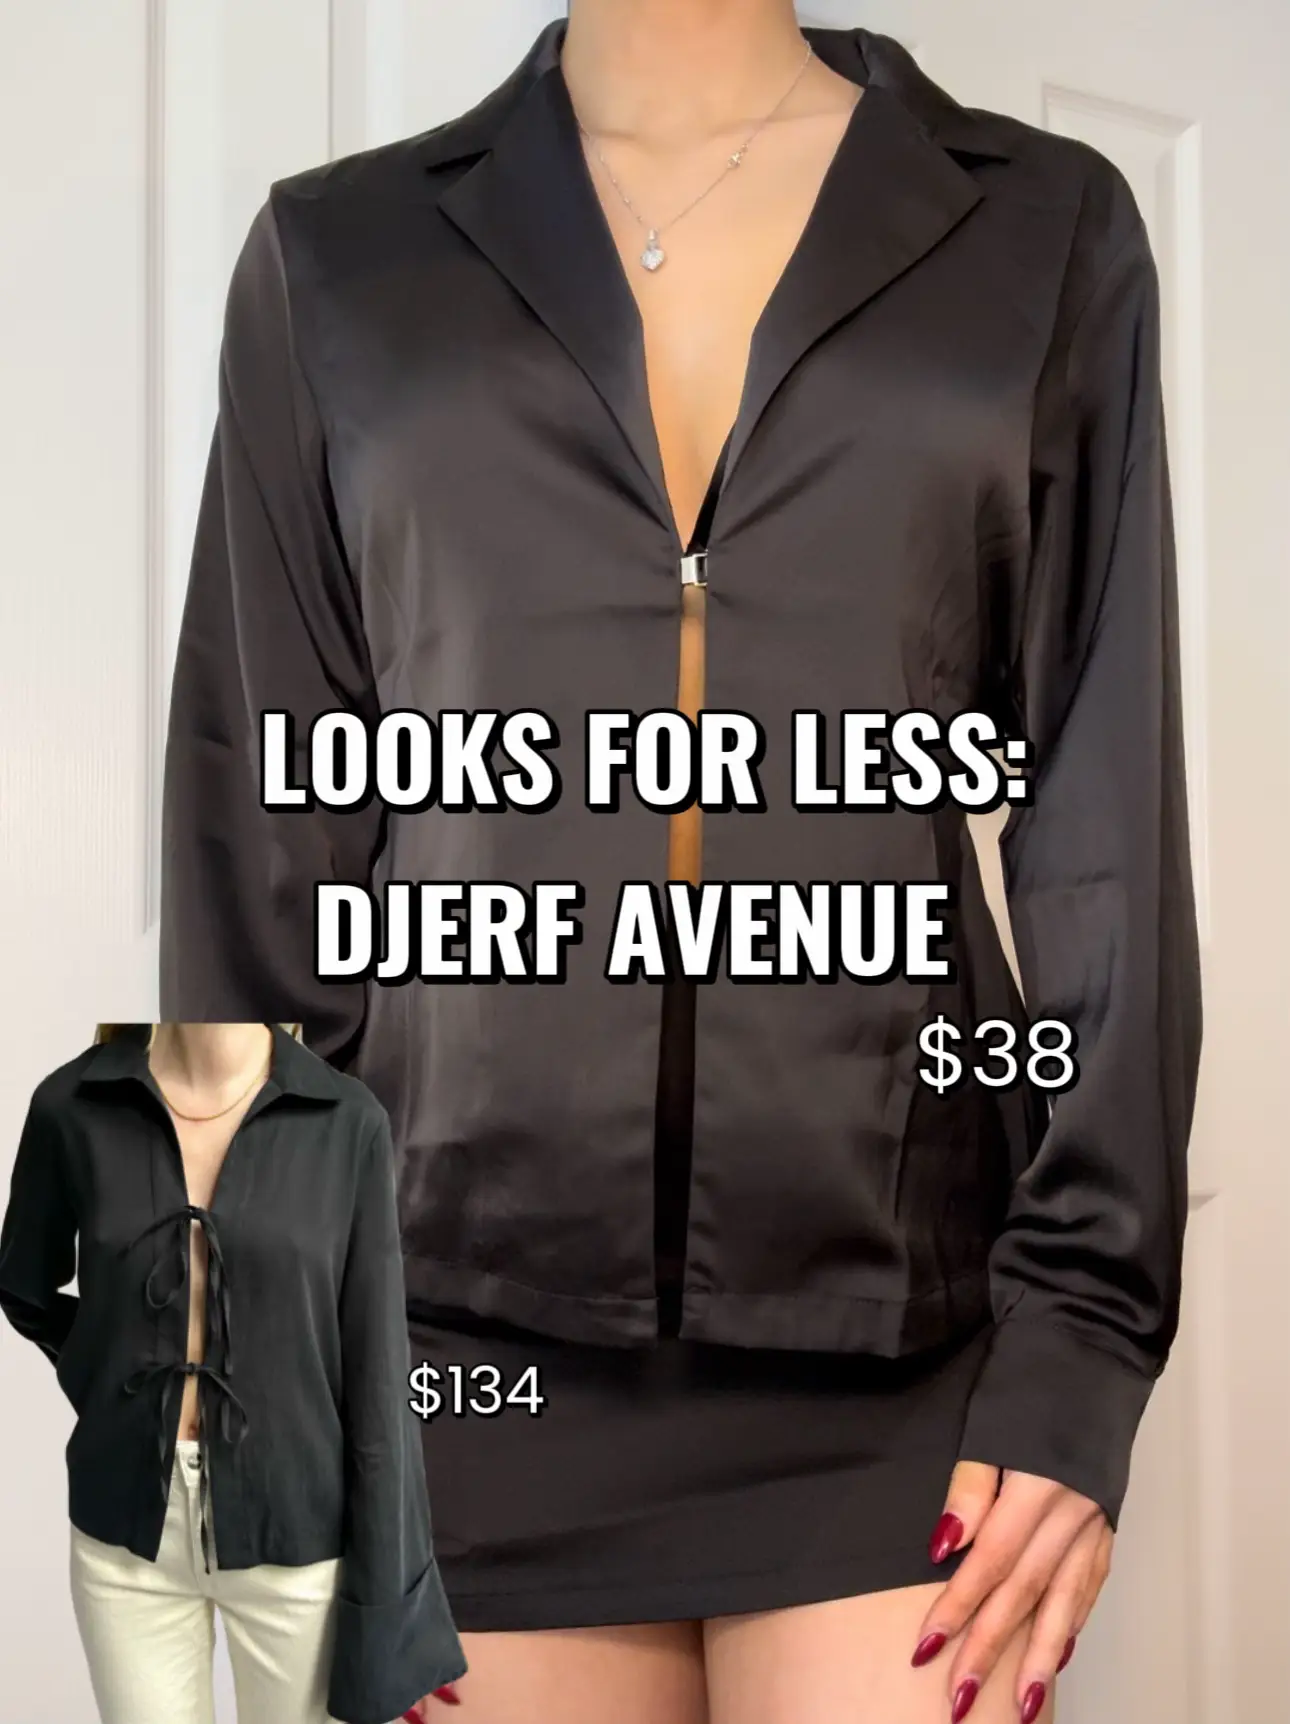 Djerf Avenue Style for Less $  Gallery posted by Lexirosenstein